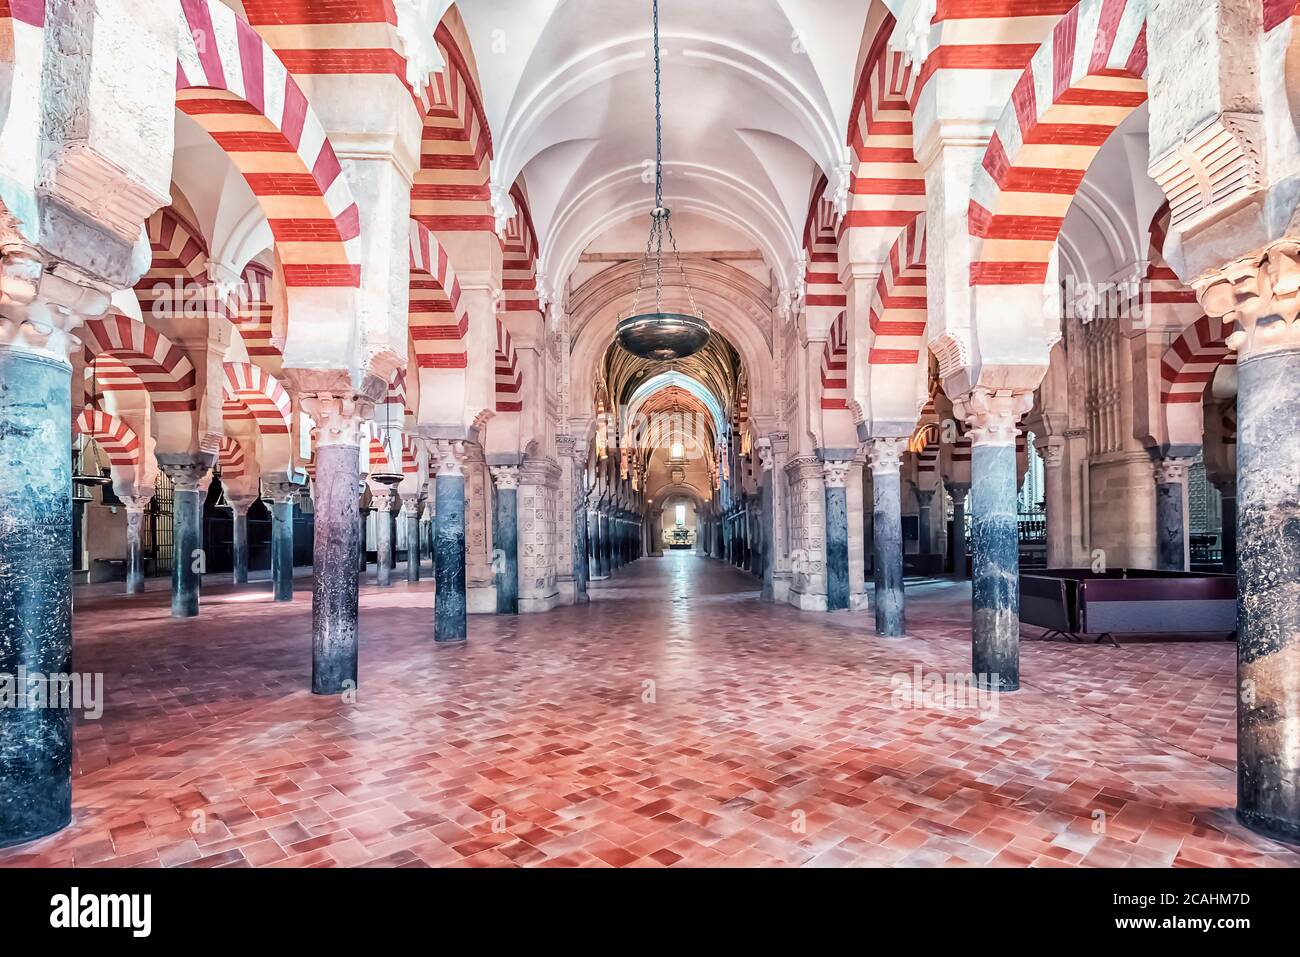 Mosque Cathedral of Cordoba, Andalusia, Spain Stock Photo